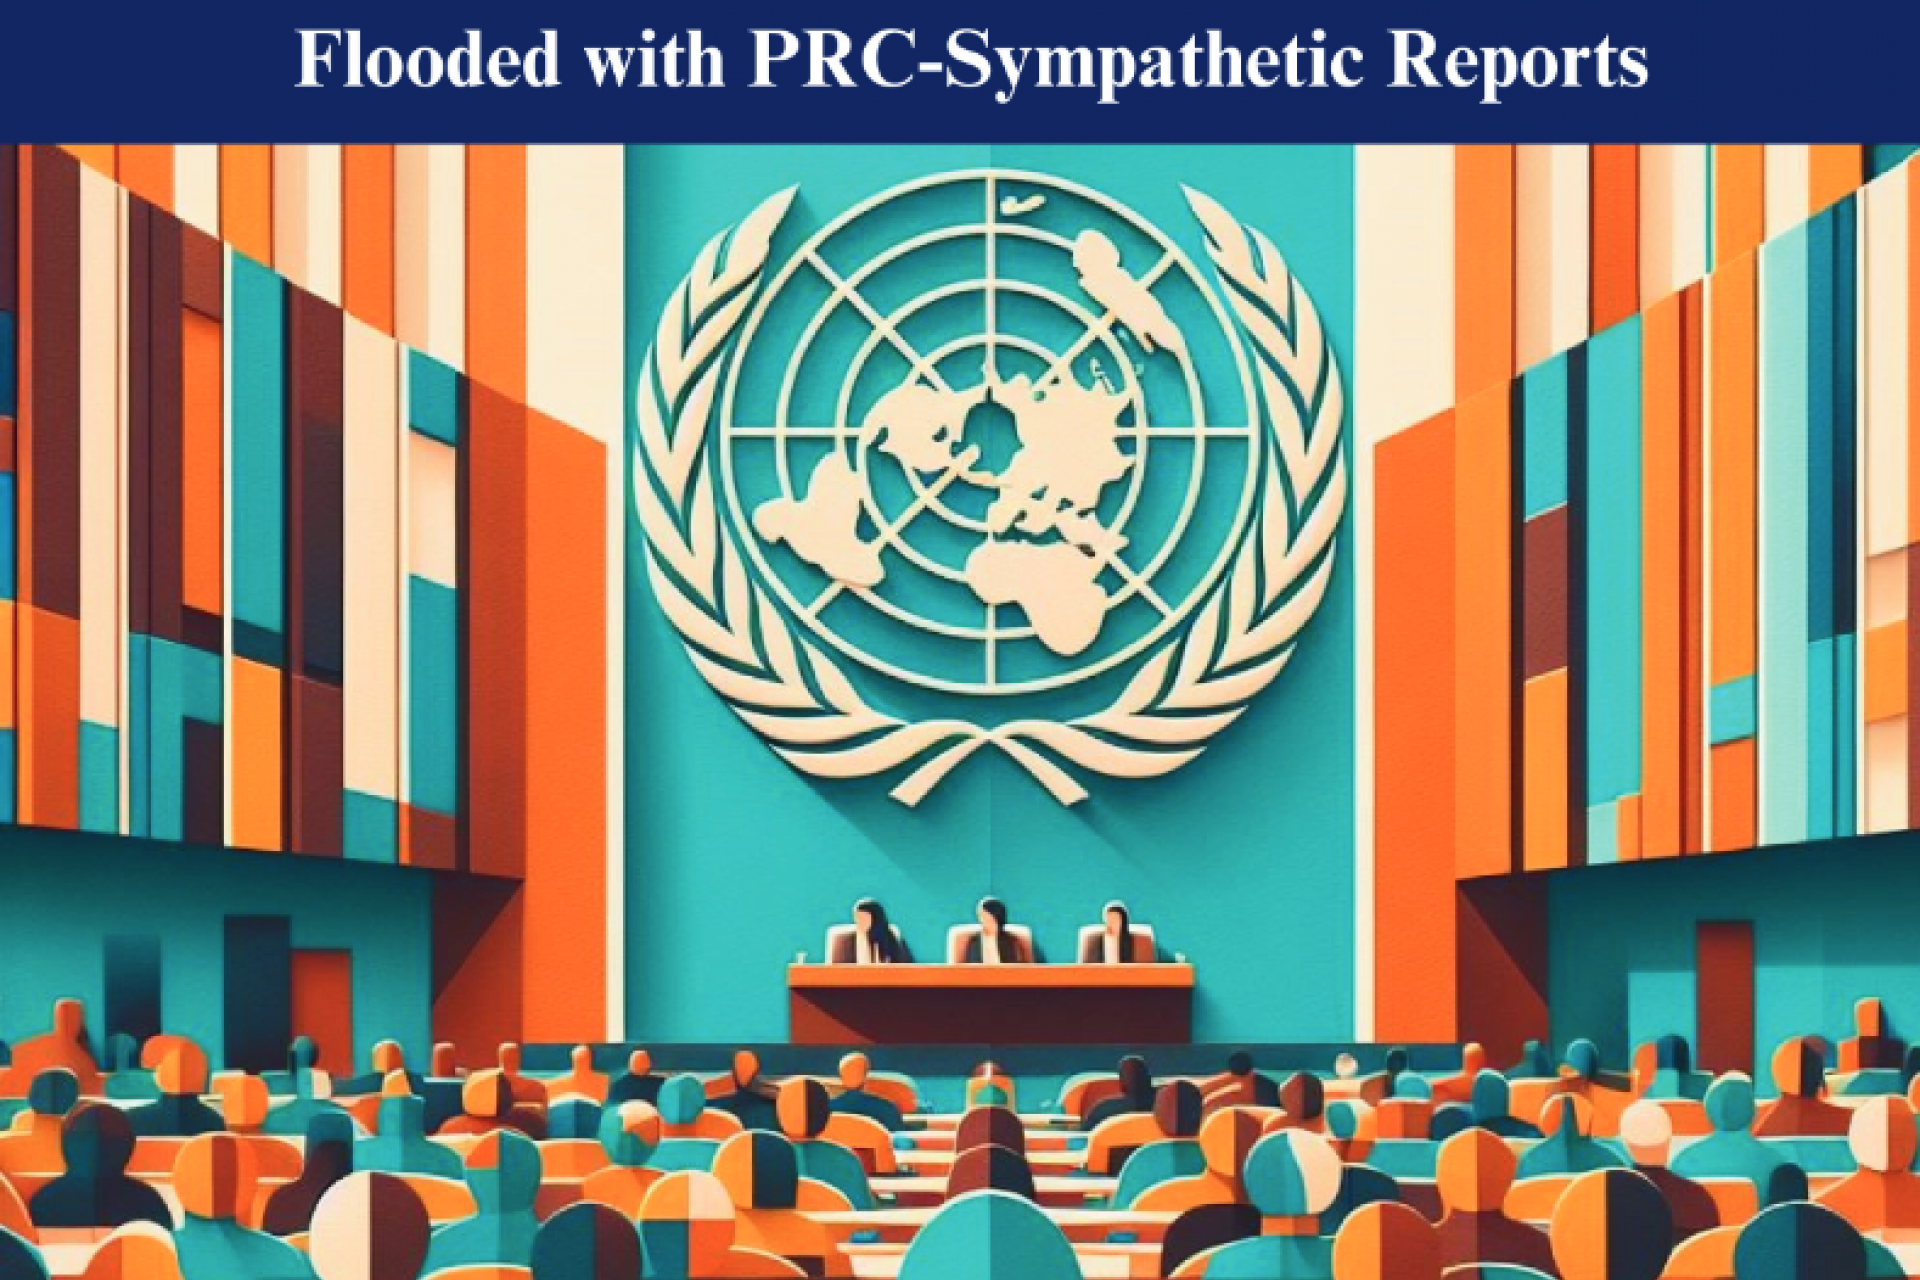  UPR Stakeholders Submissions Flooded with PRC-Sympathetic Reports feature image